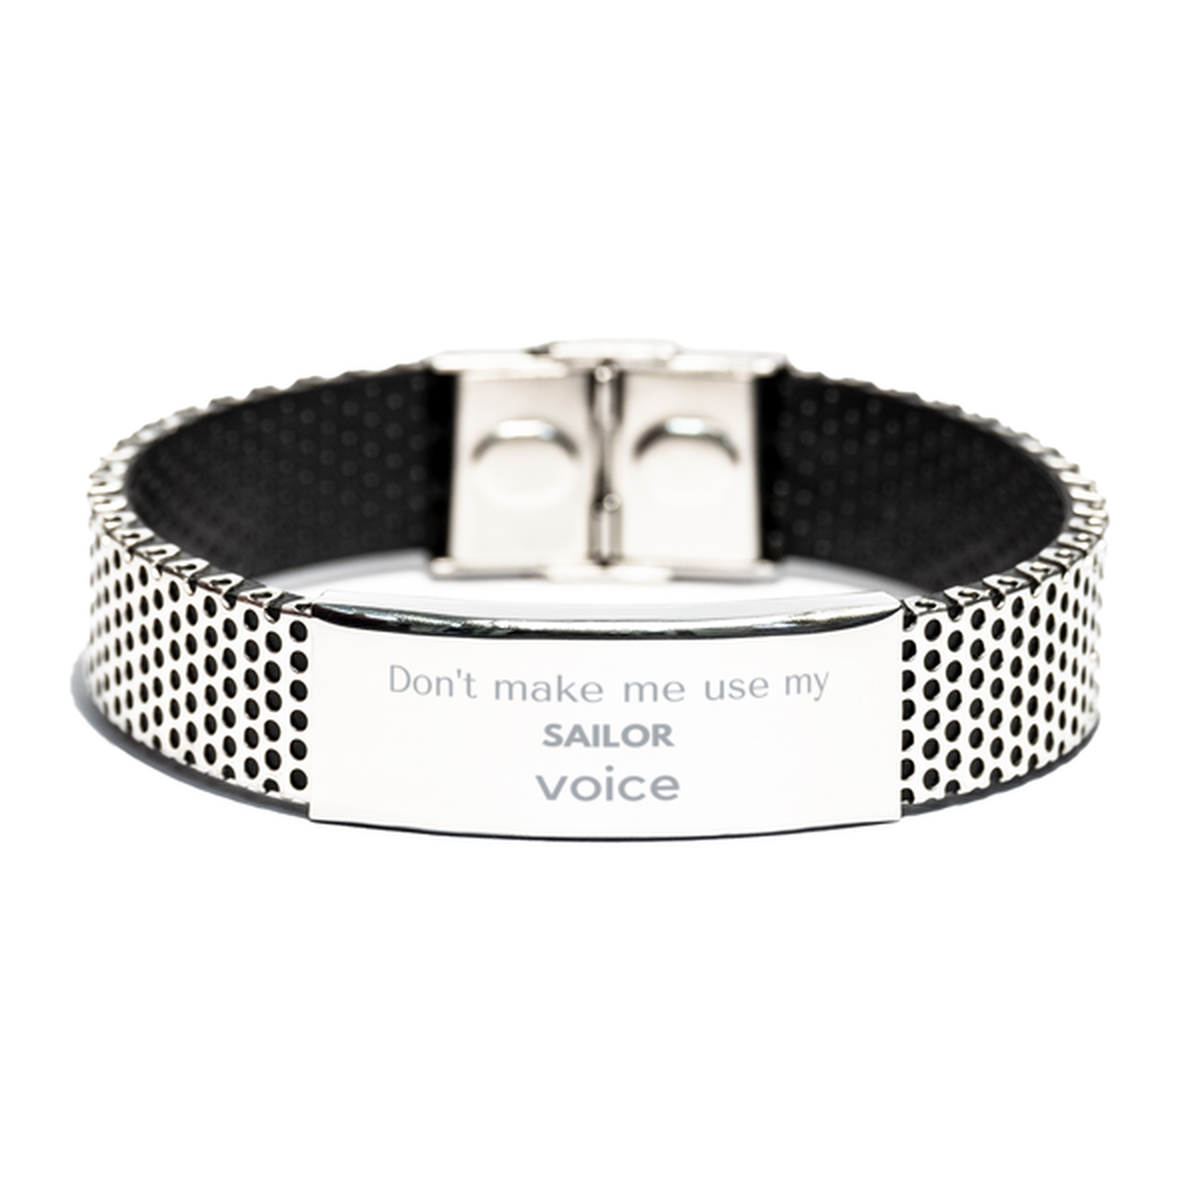 Don't make me use my Sailor voice, Sarcasm Sailor Gifts, Christmas Sailor Stainless Steel Bracelet Birthday Unique Gifts For Sailor Coworkers, Men, Women, Colleague, Friends